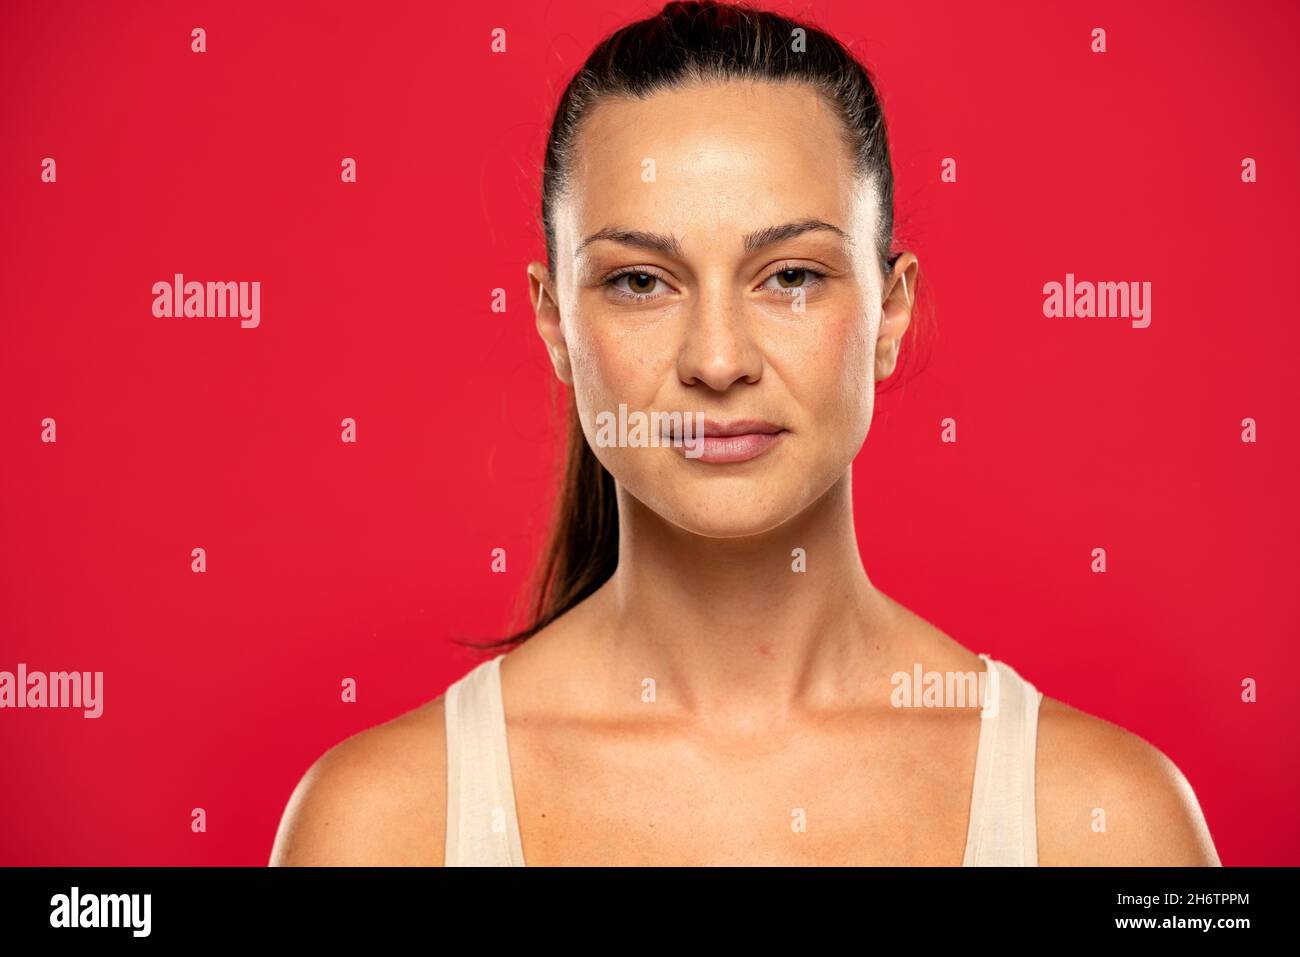 Portrait of beautiful serious woman with tied hair on a red background Stock Photo